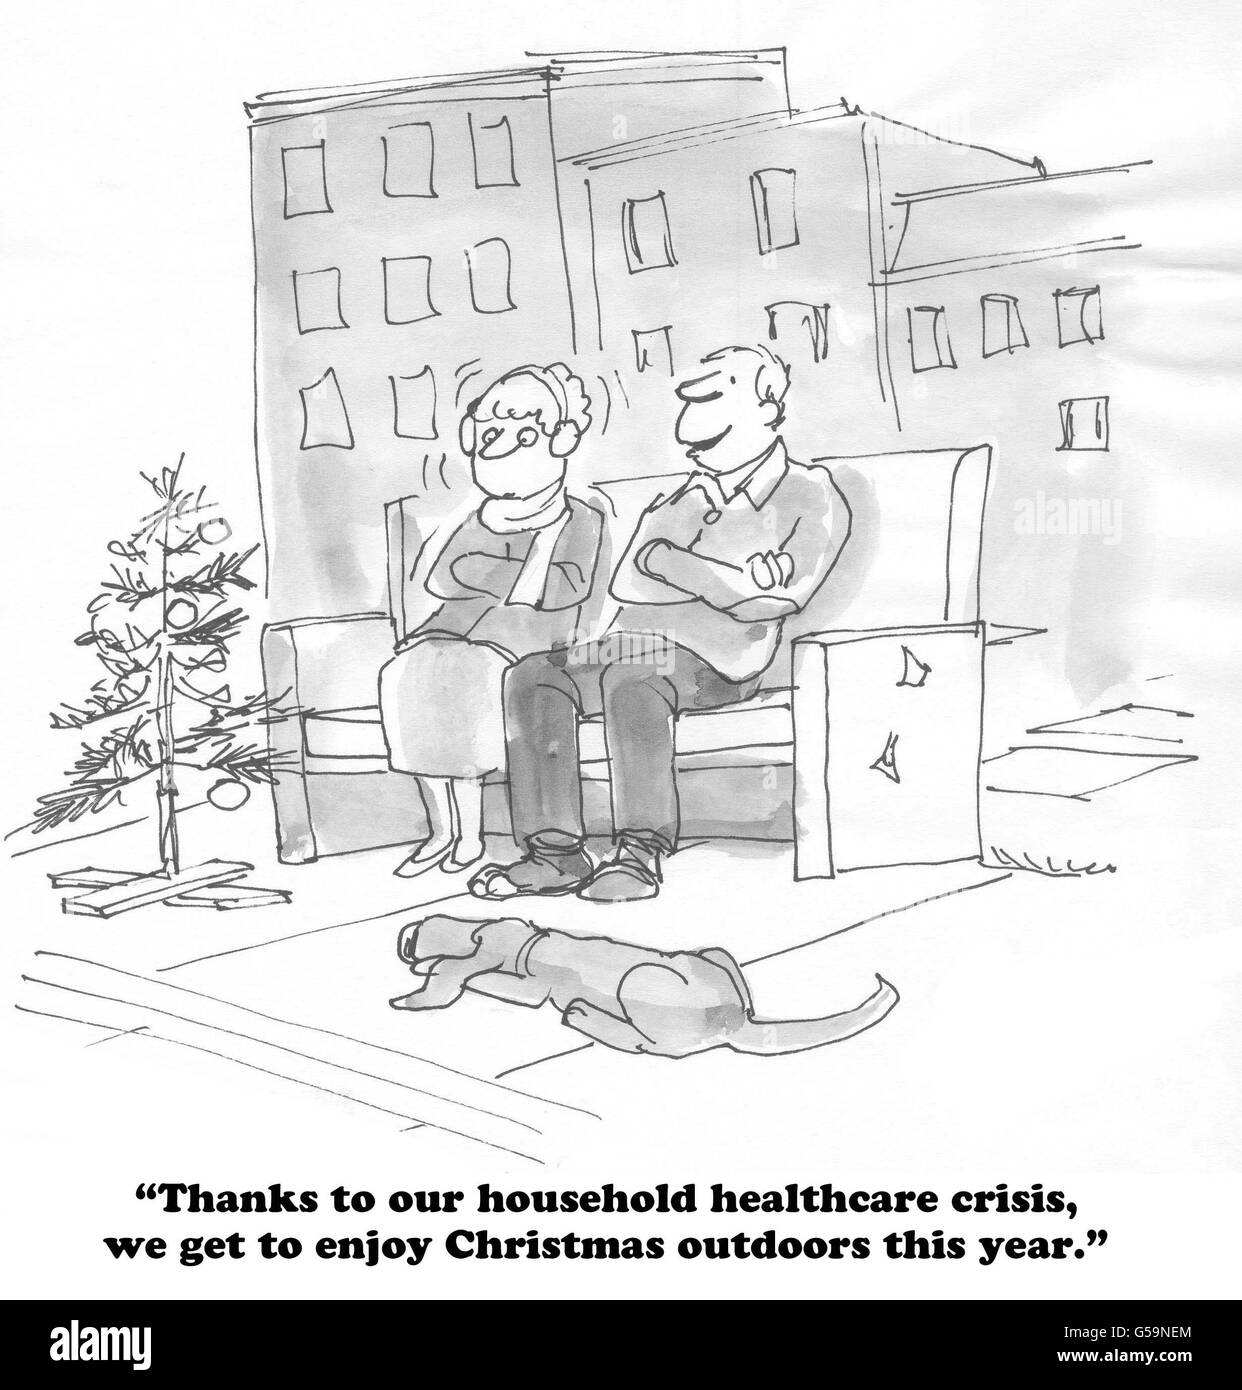 Cartoon about an elderly couple who spent all their money on healthcare so they are homeless at Christmas. Stock Photo